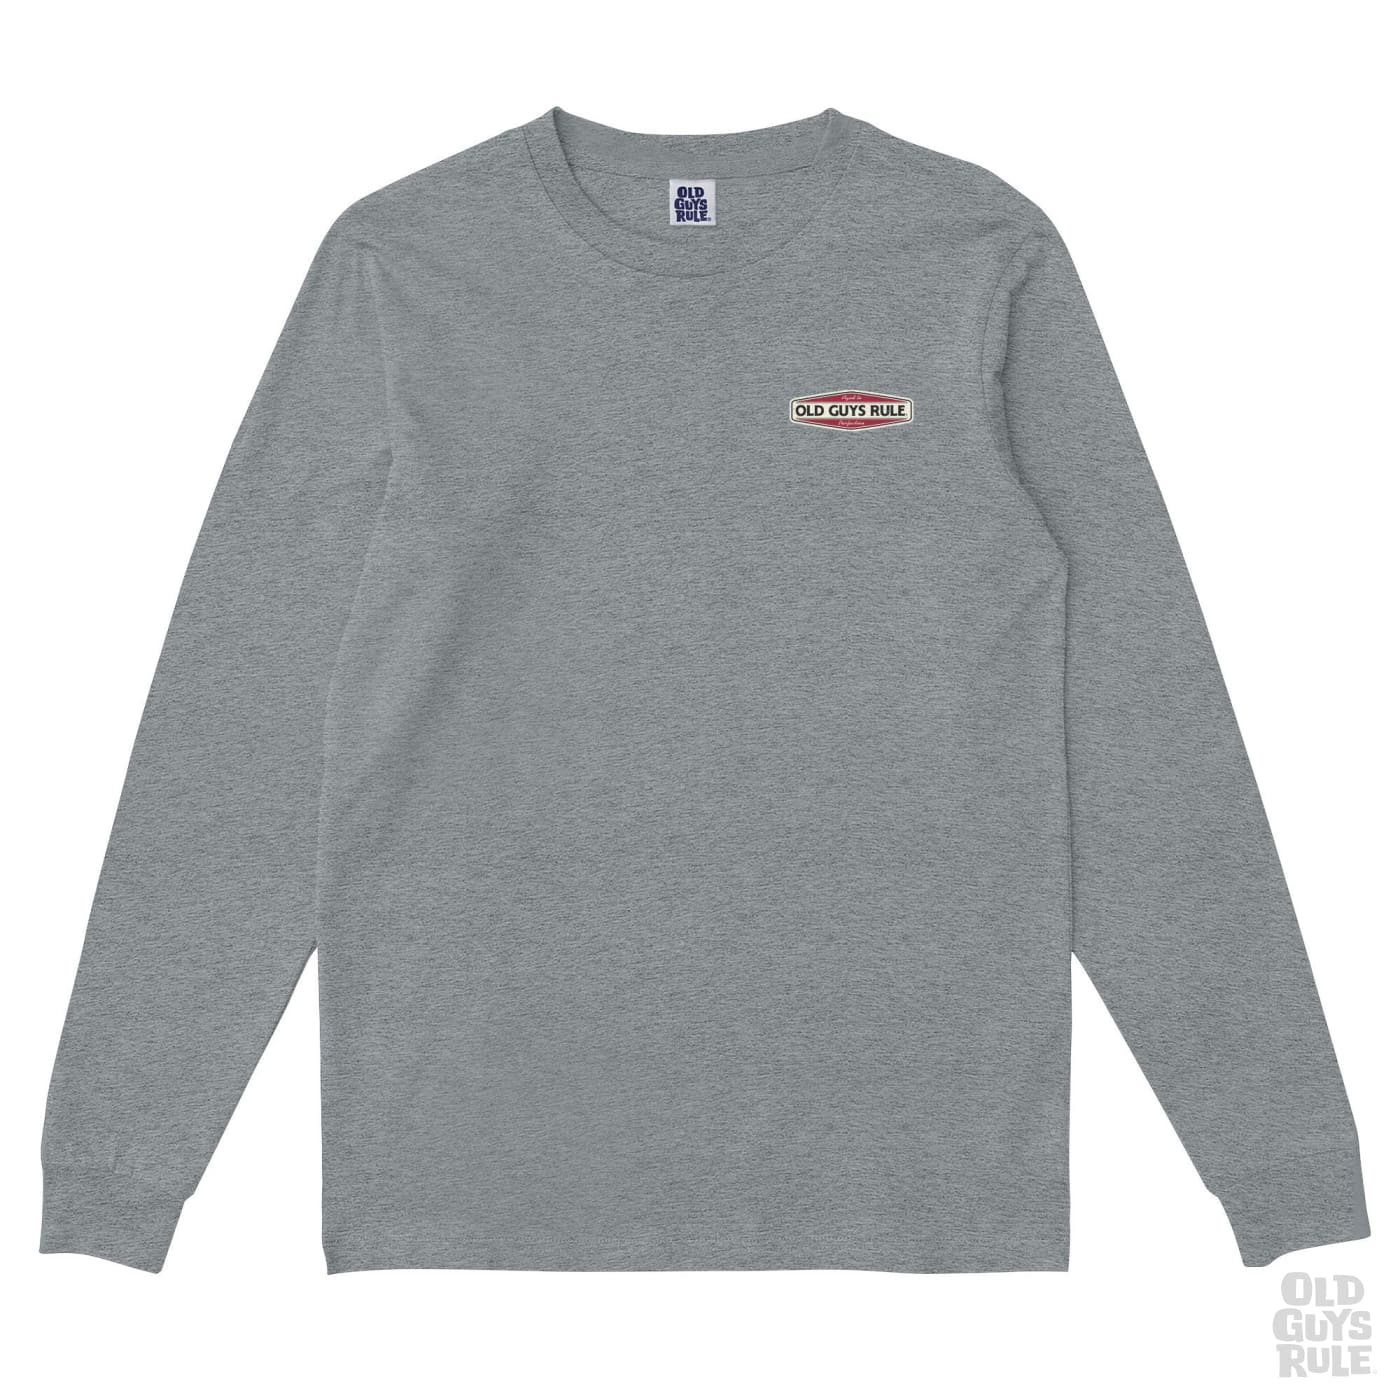 Old Guys Rule Aged To Perfection II Long Sleeve T-Shirt - Sport Grey. Grumpy old git. Gifts for dads. Christmas gifts for dad. Christmas gifts for him. 